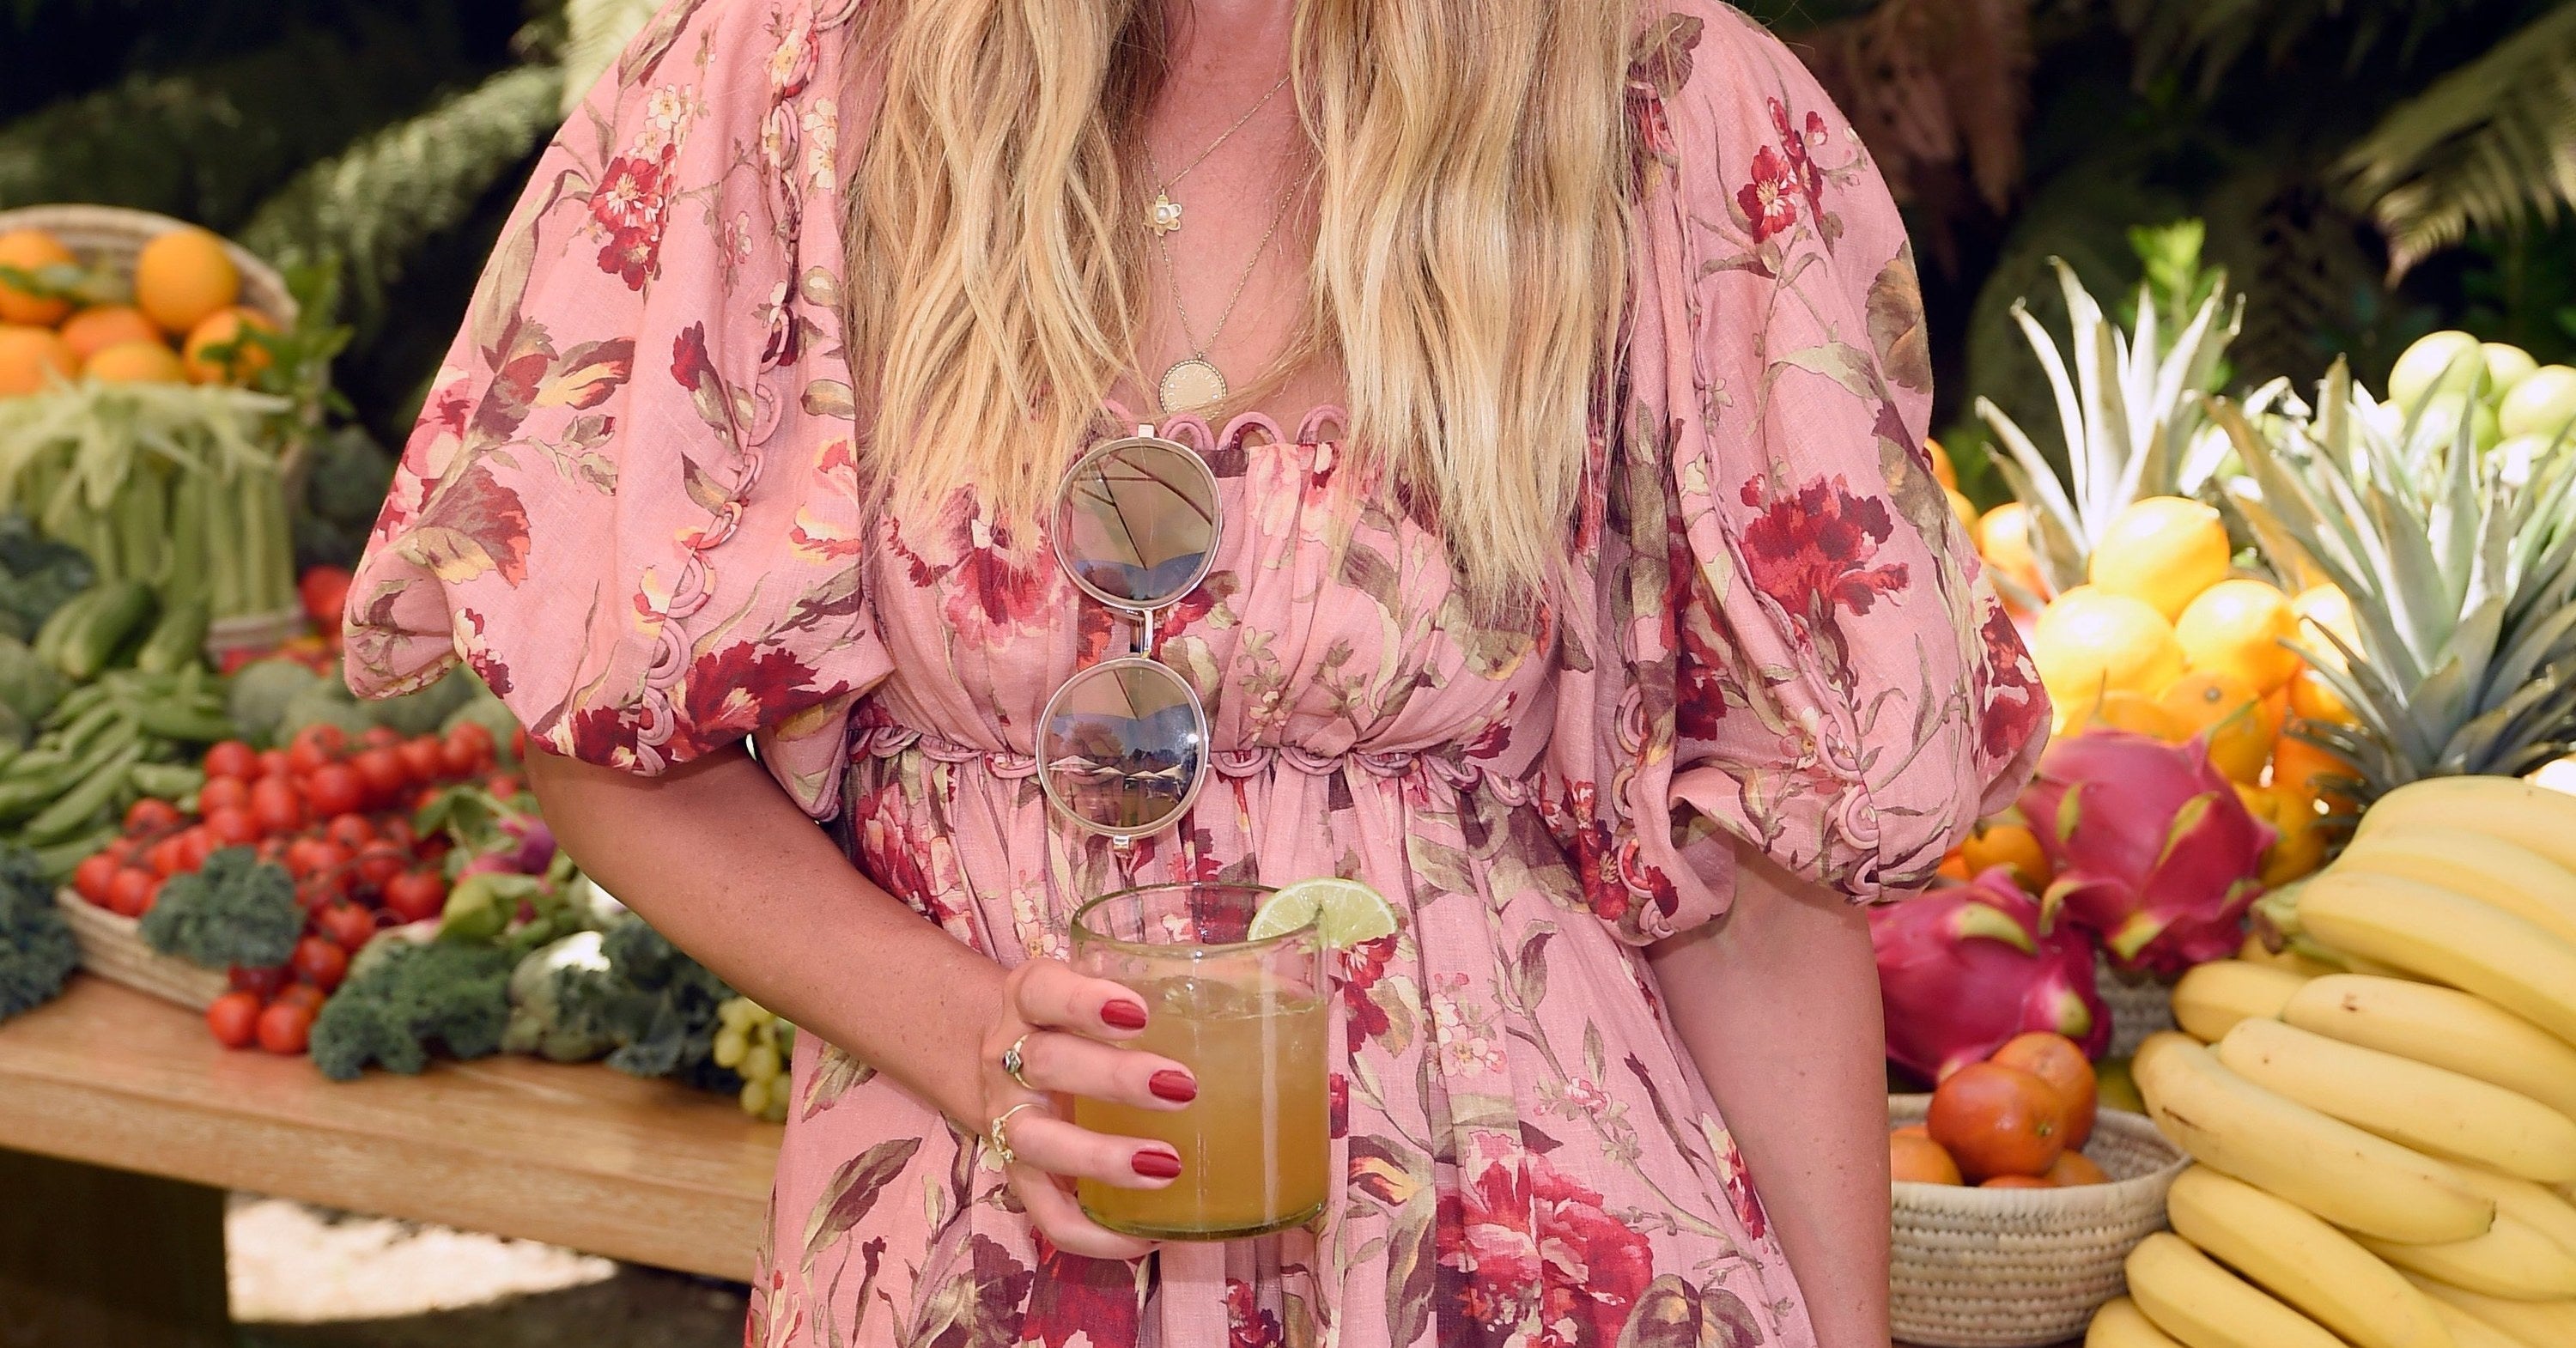 Lauren Conrad Reveals Why She's 'Done' With Reality TV – Hollywood